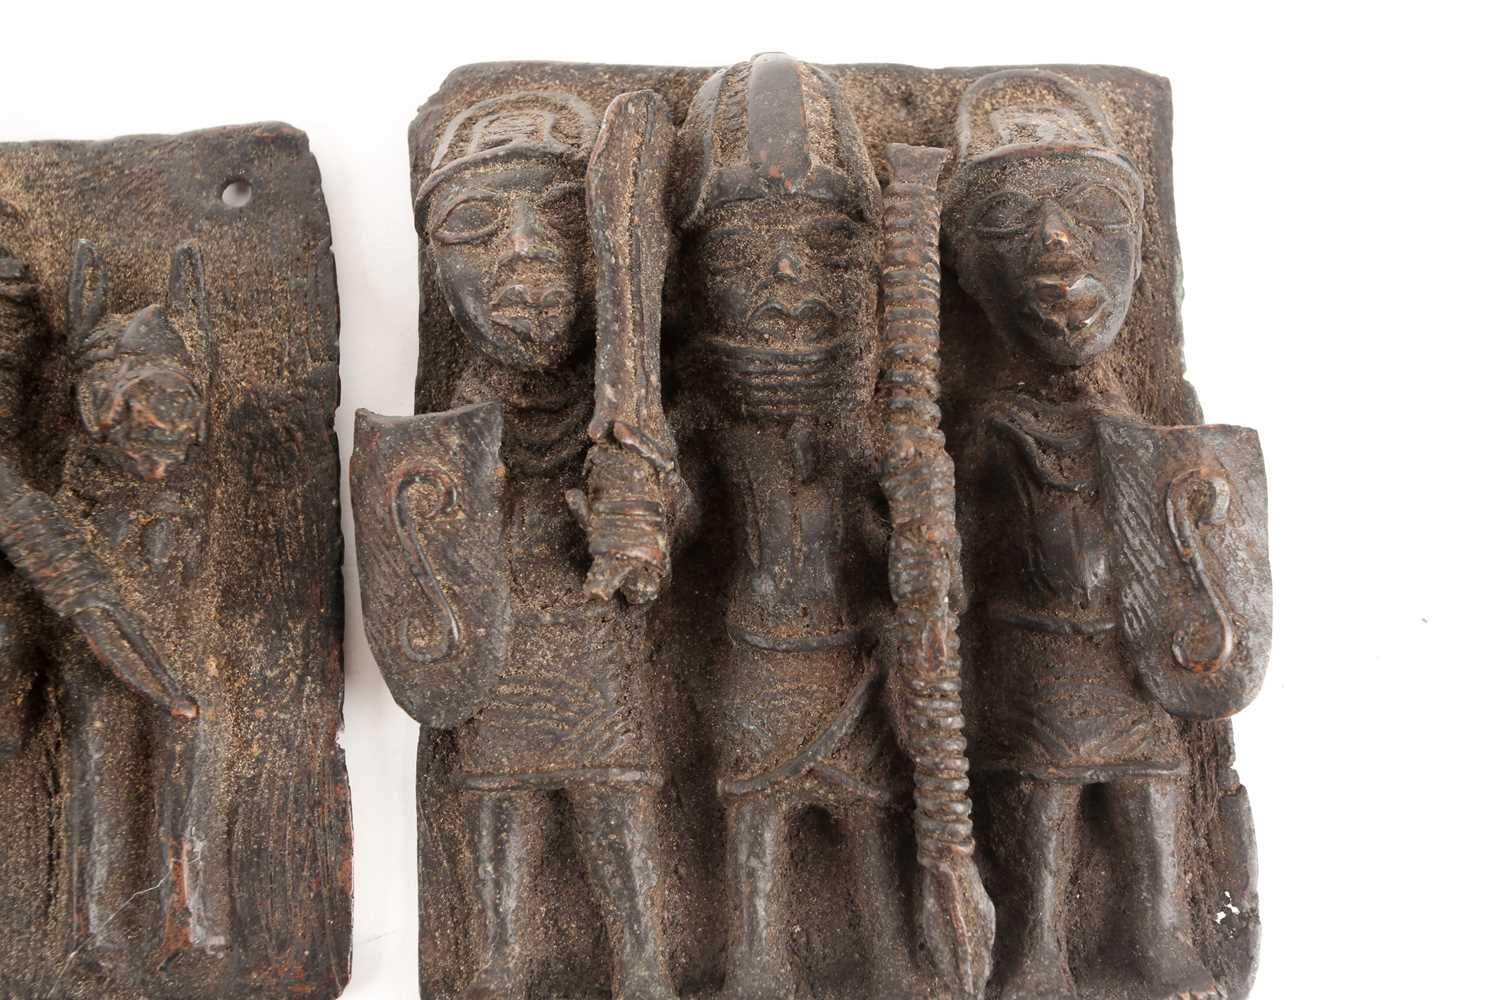 Three Benin bronze plaques, Nigeria, comprising an equestrian warrior and attendant, a group of - Image 2 of 5